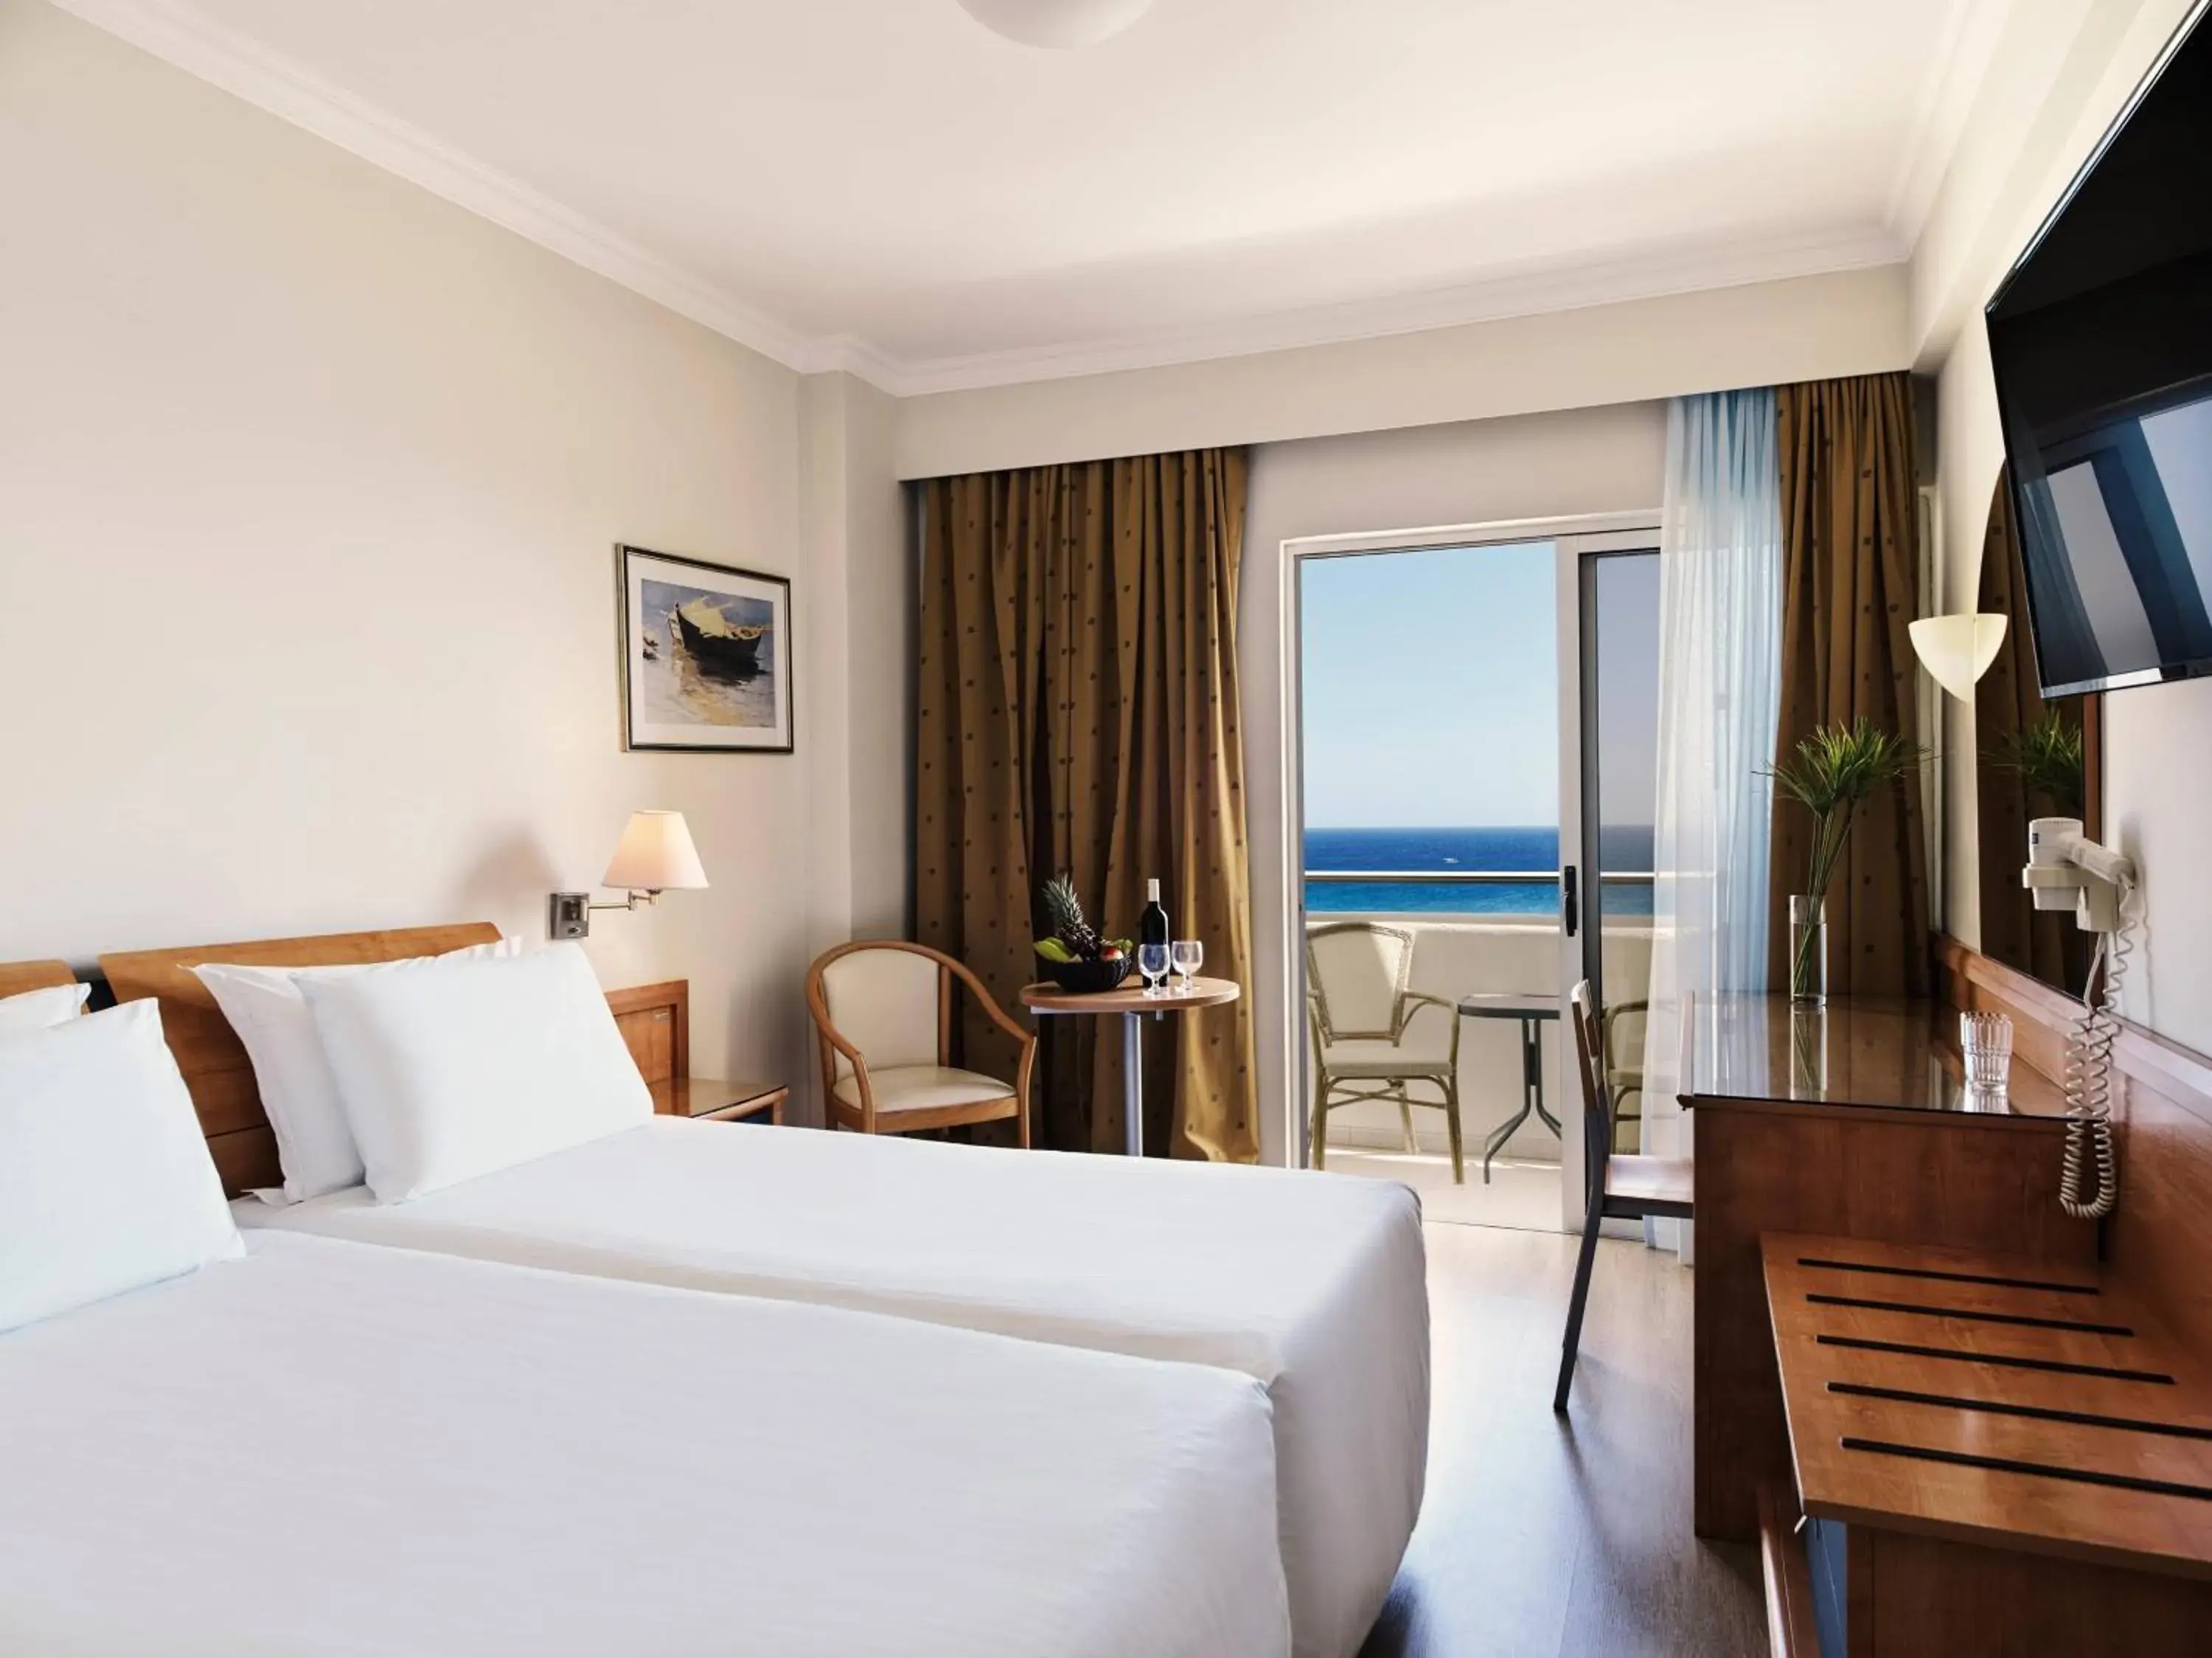 Twin Room with Sea View in Esperides Beach Resort